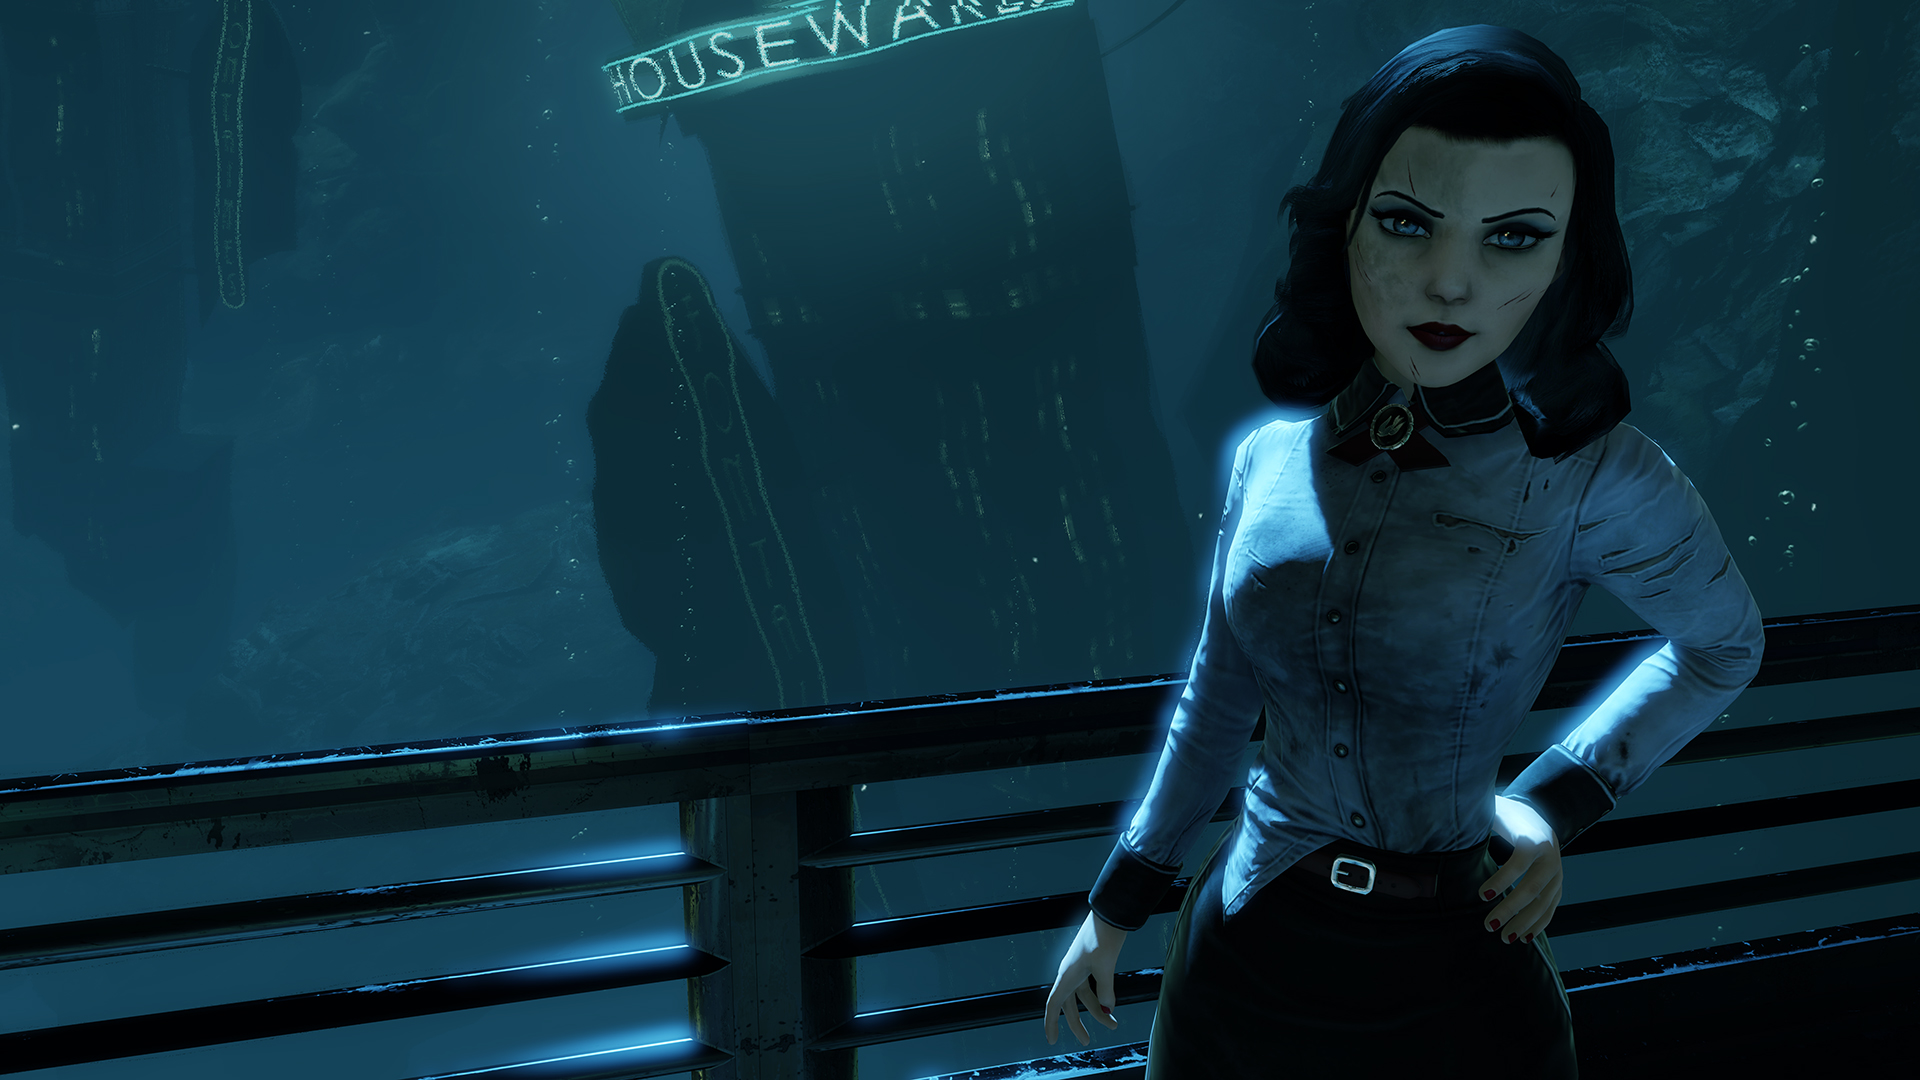 BioShock Infinite: Burial At Sea Backgrounds, Compatible - PC, Mobile, Gadgets| 1920x1080 px